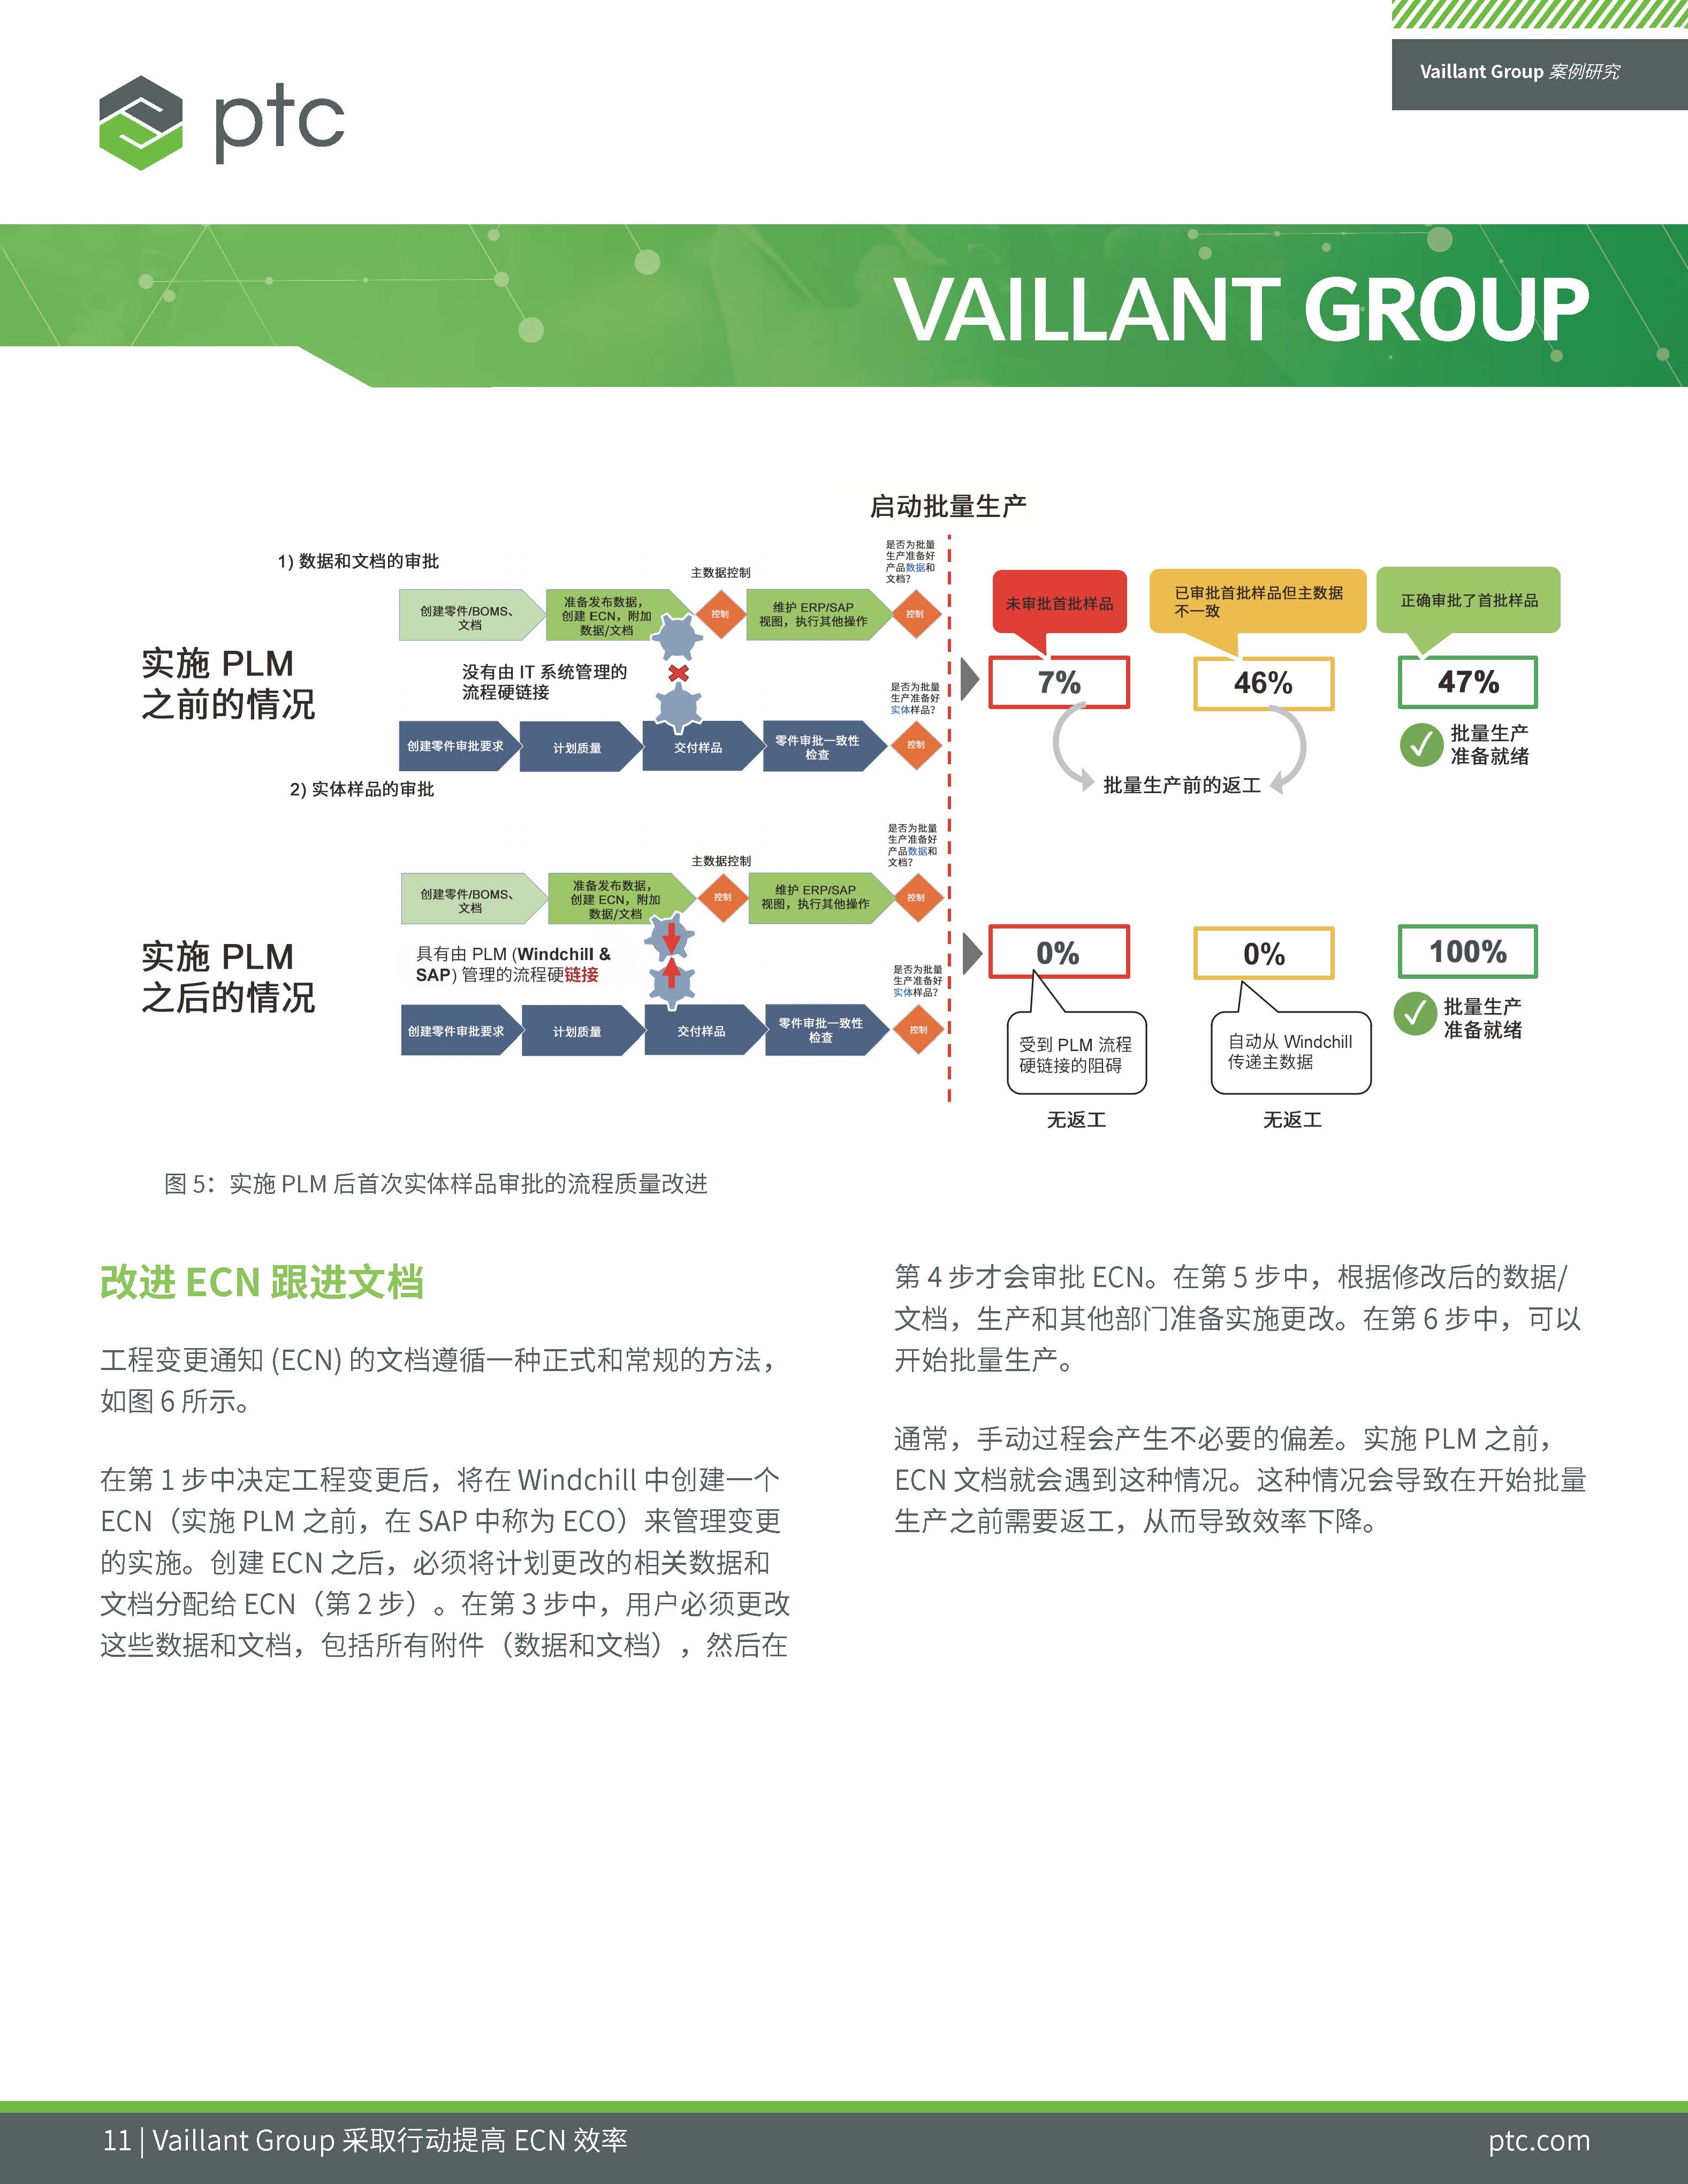 Vaillant Group's Digital Transformation (Chinese)_页面_11.jpg